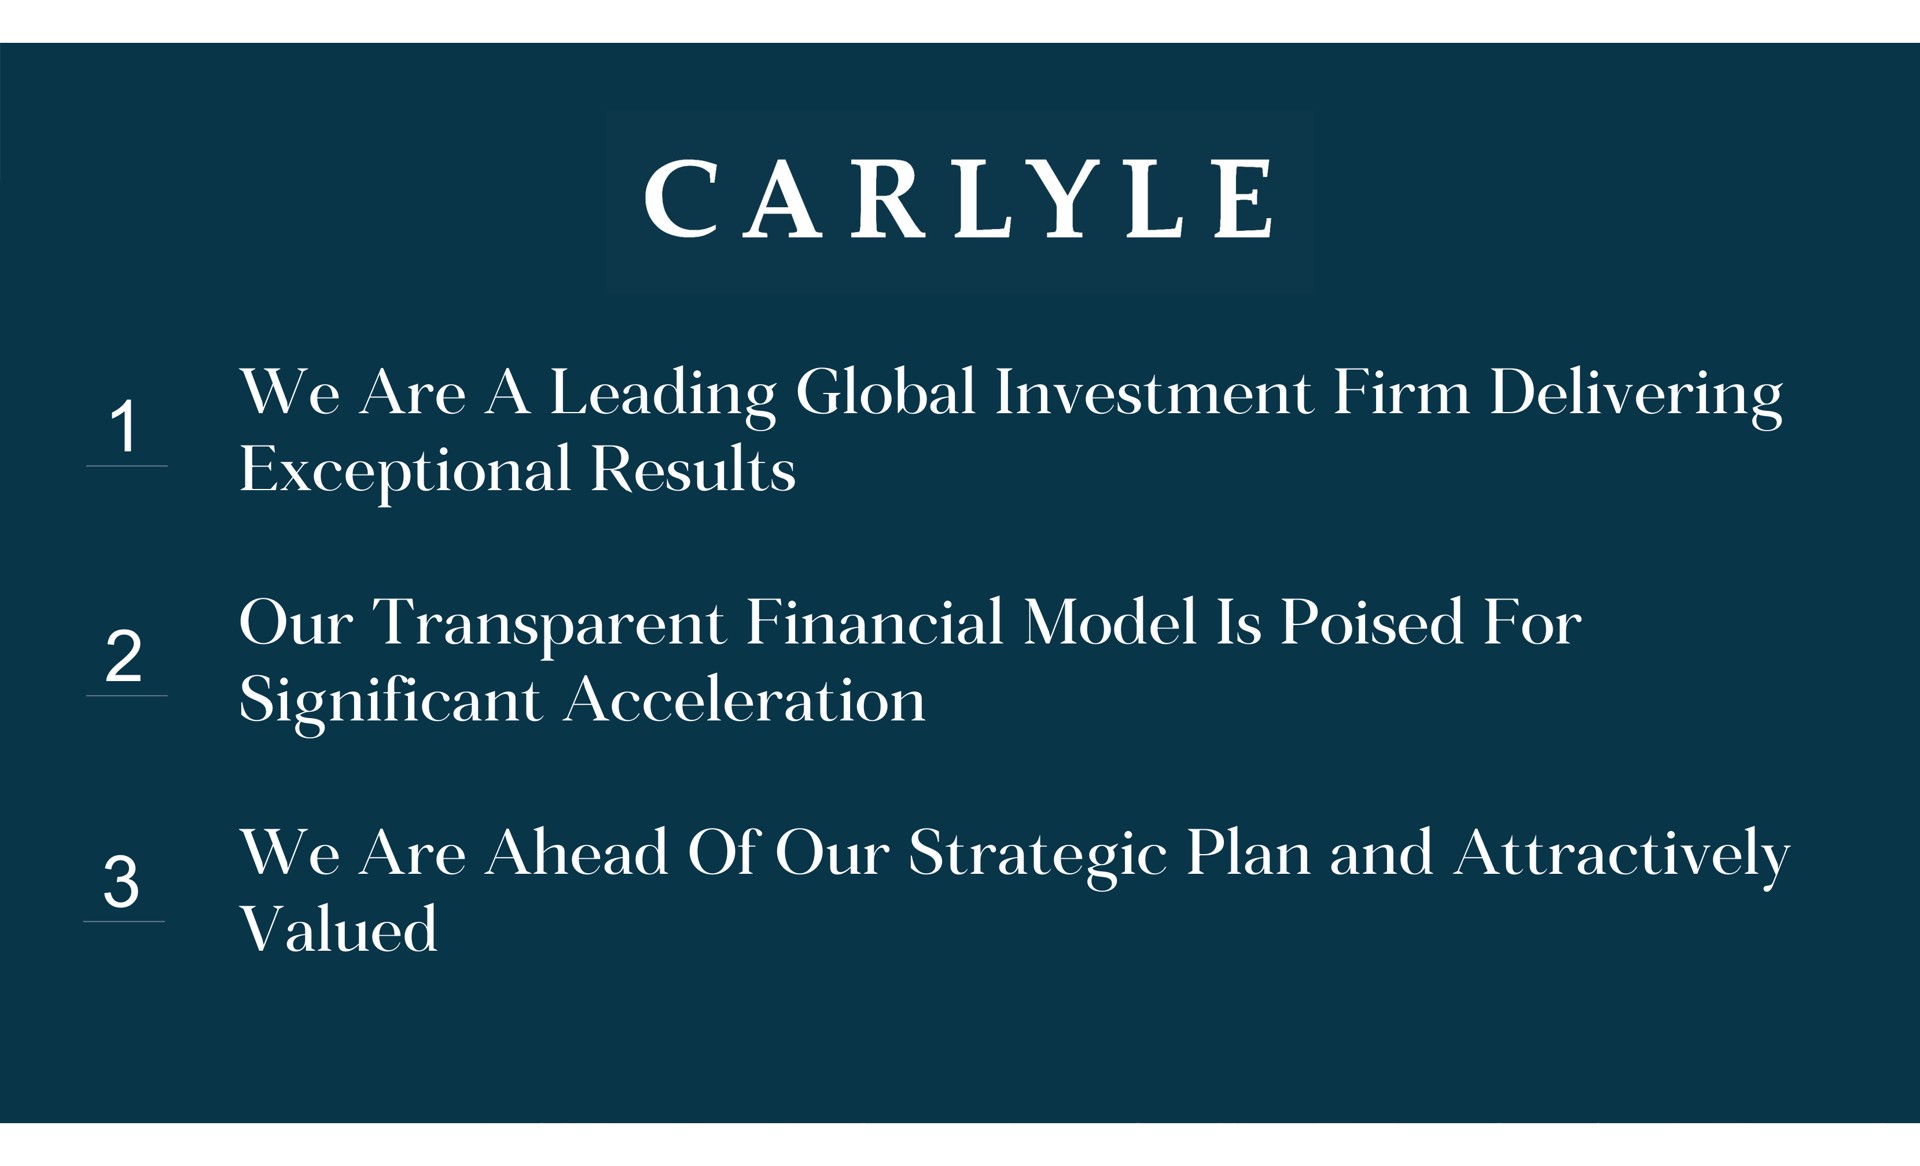 we are a leading global investment firm delivering exceptional results our transparent financial model is poised for significant acceleration we are ahead of our strategic plan and attractively valued | Carlyle